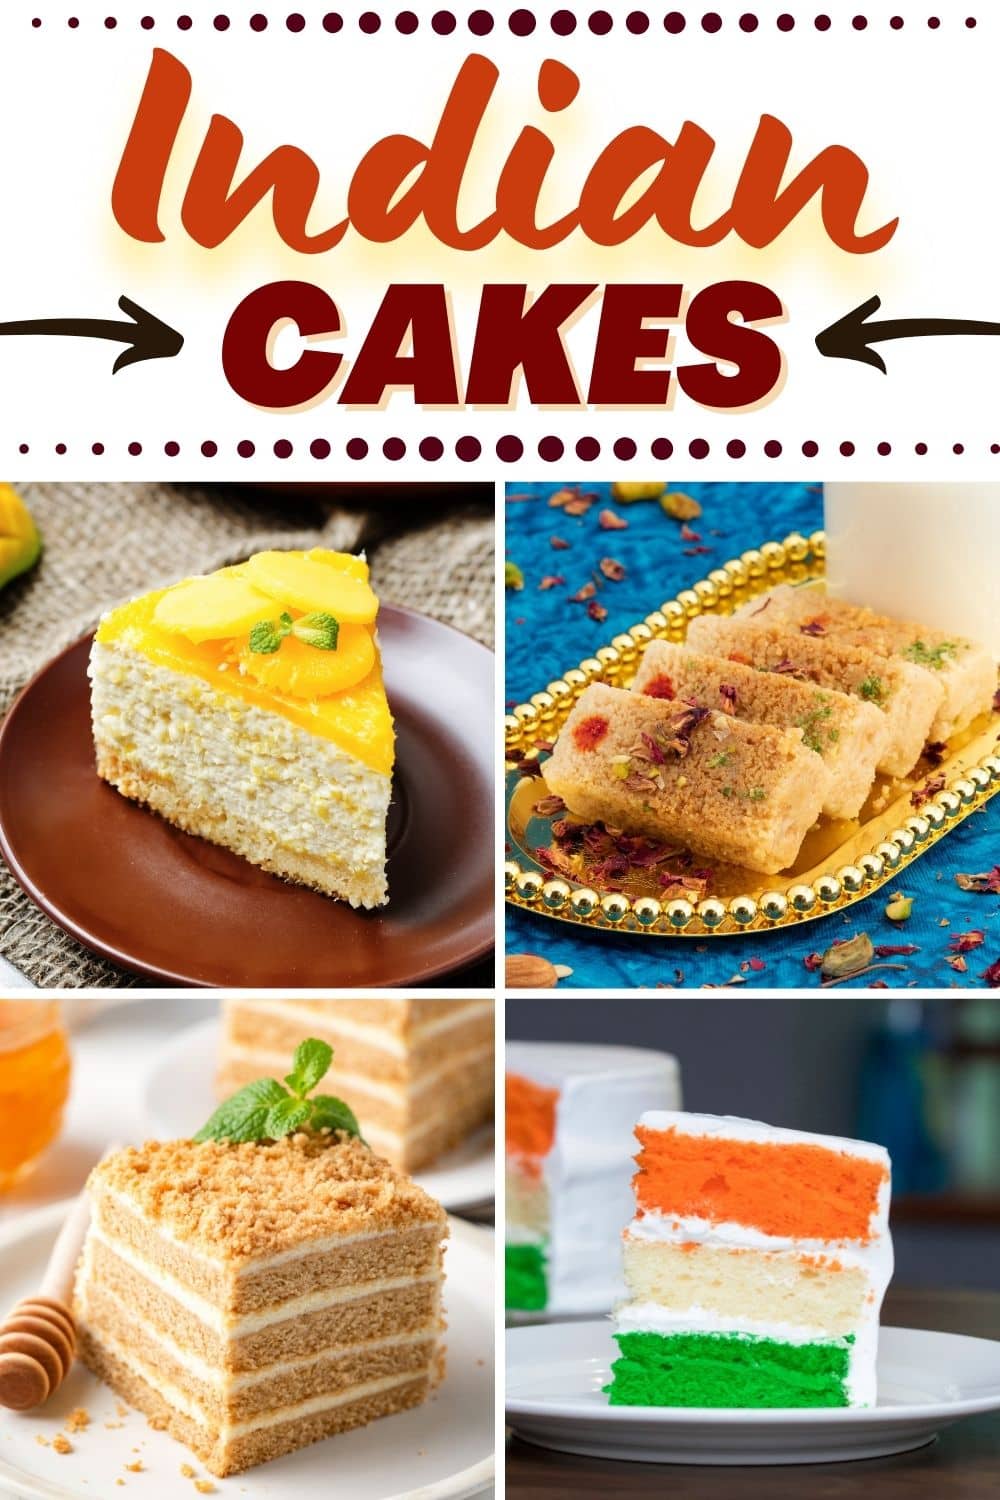 13 Traditional Indian Cakes (+ Easy Recipes) - Insanely Good